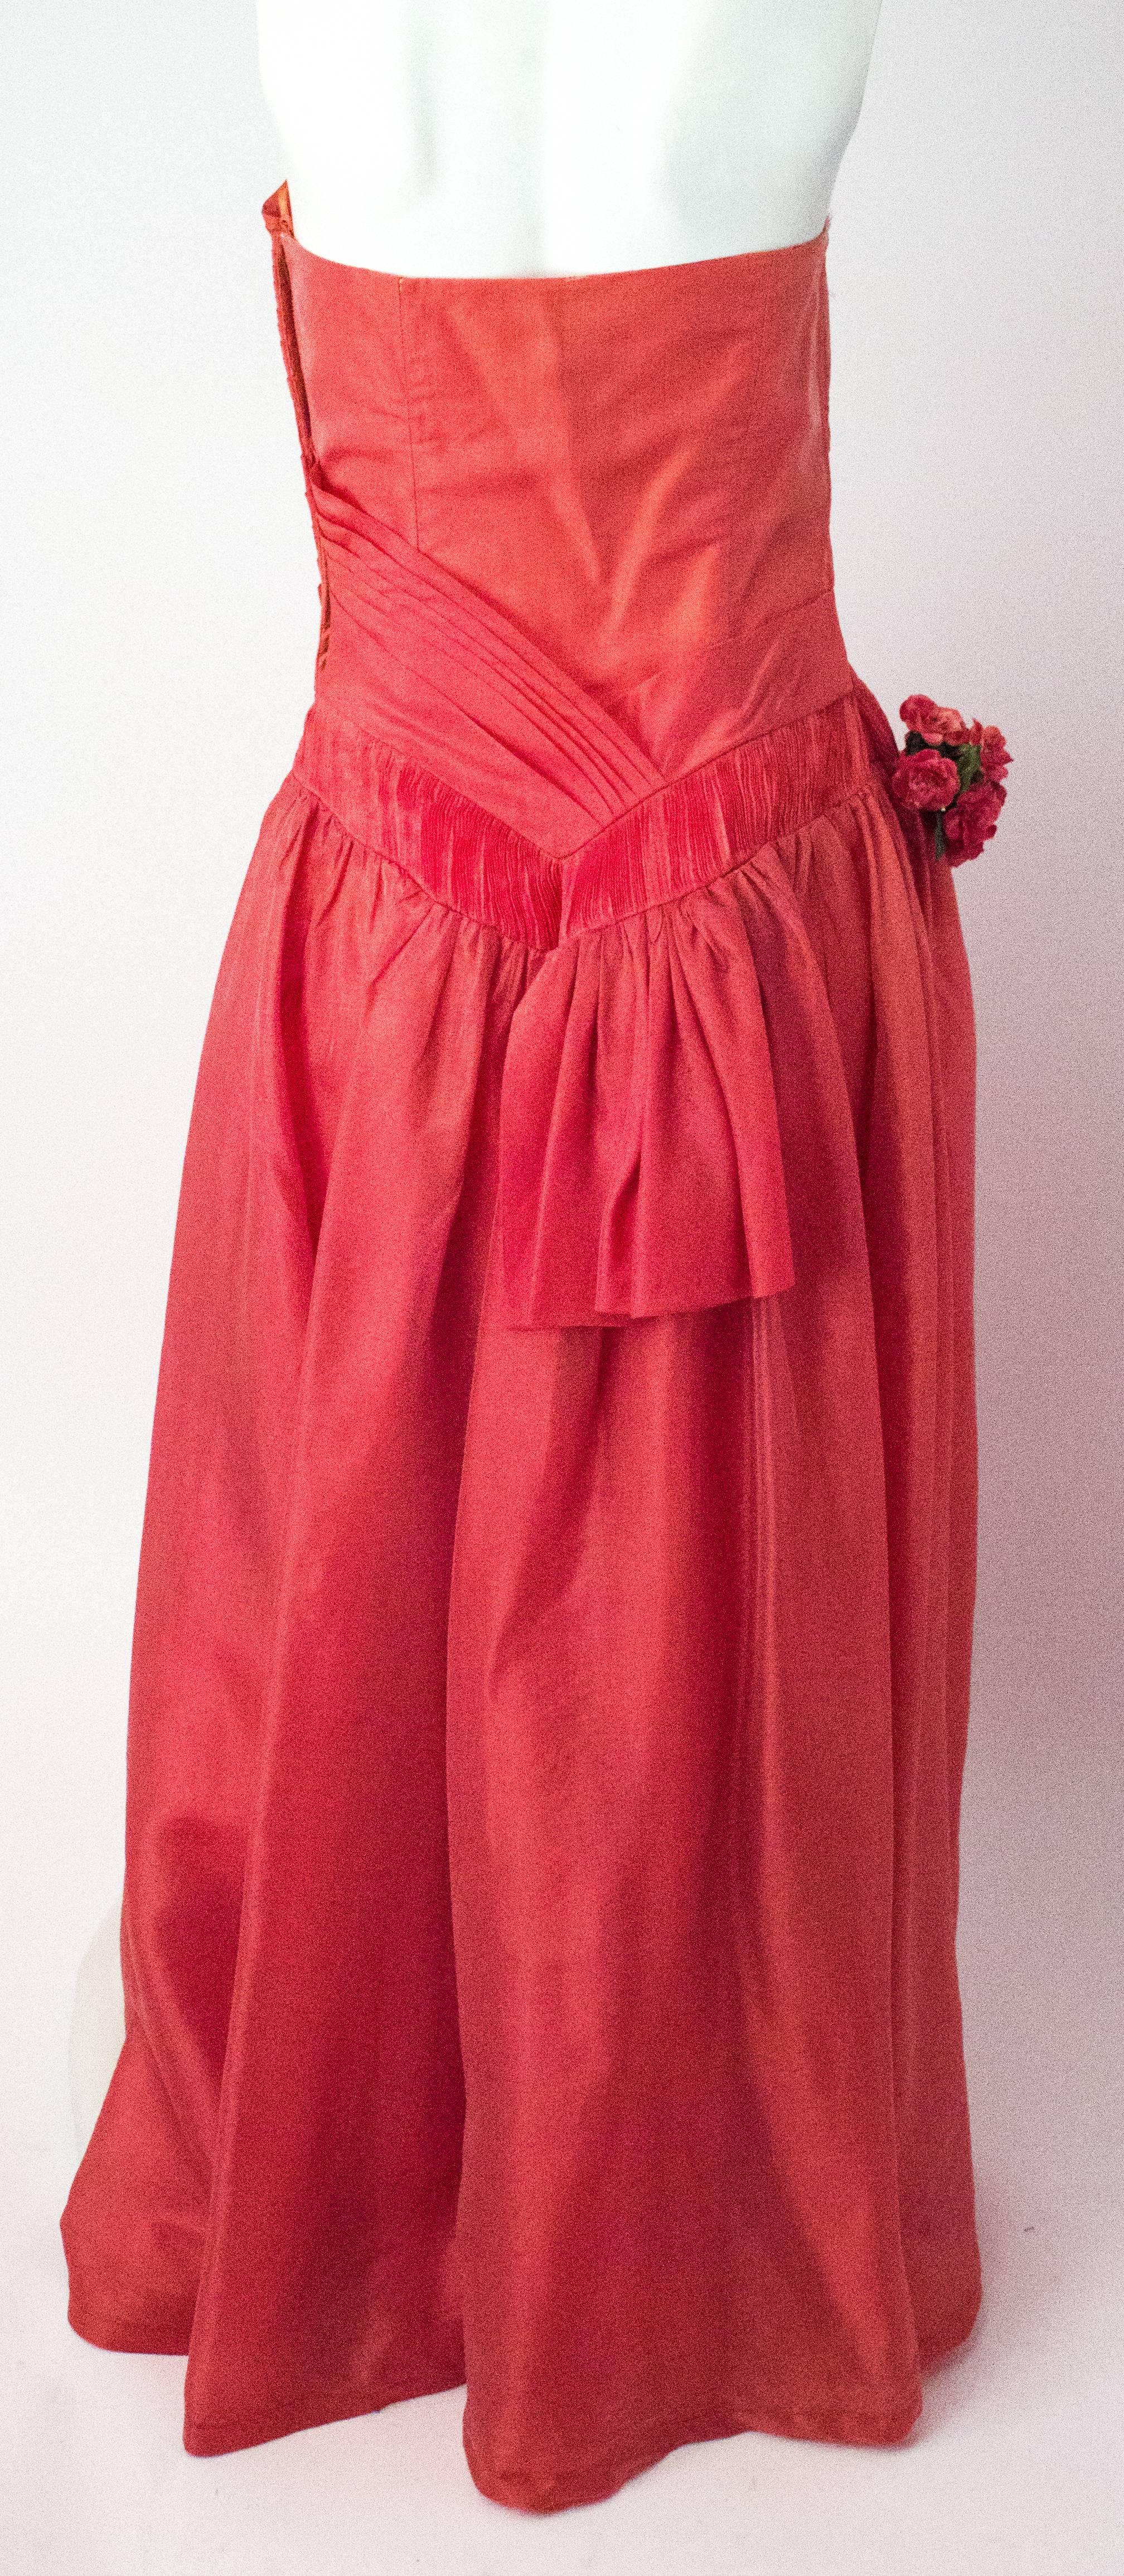 1950s iridescent coral organza gown. Drop waist with floral bouquet detail. 